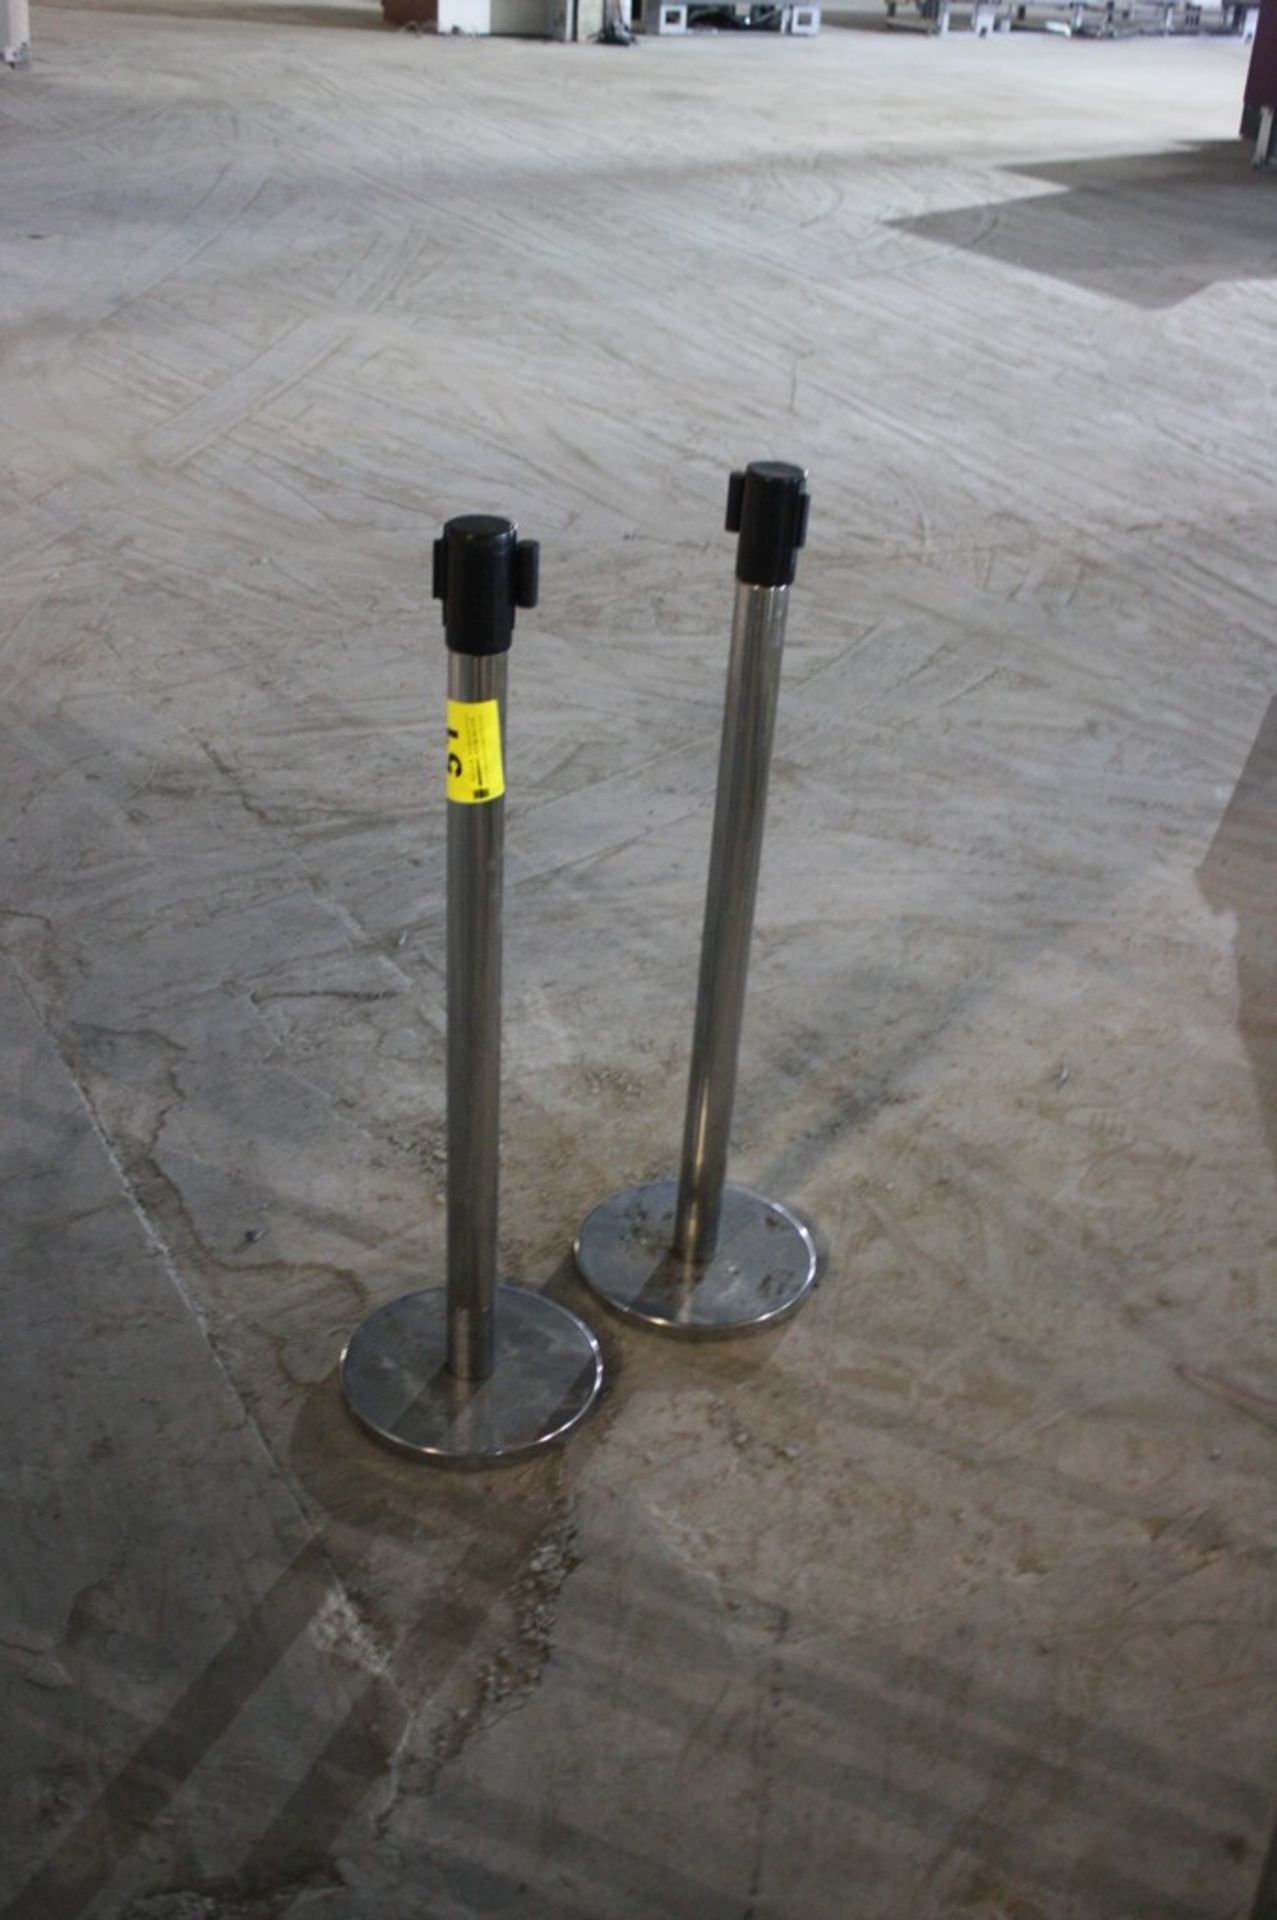 (2) B-O-F CORPORATION CROWD CONTROL STANCHIONS